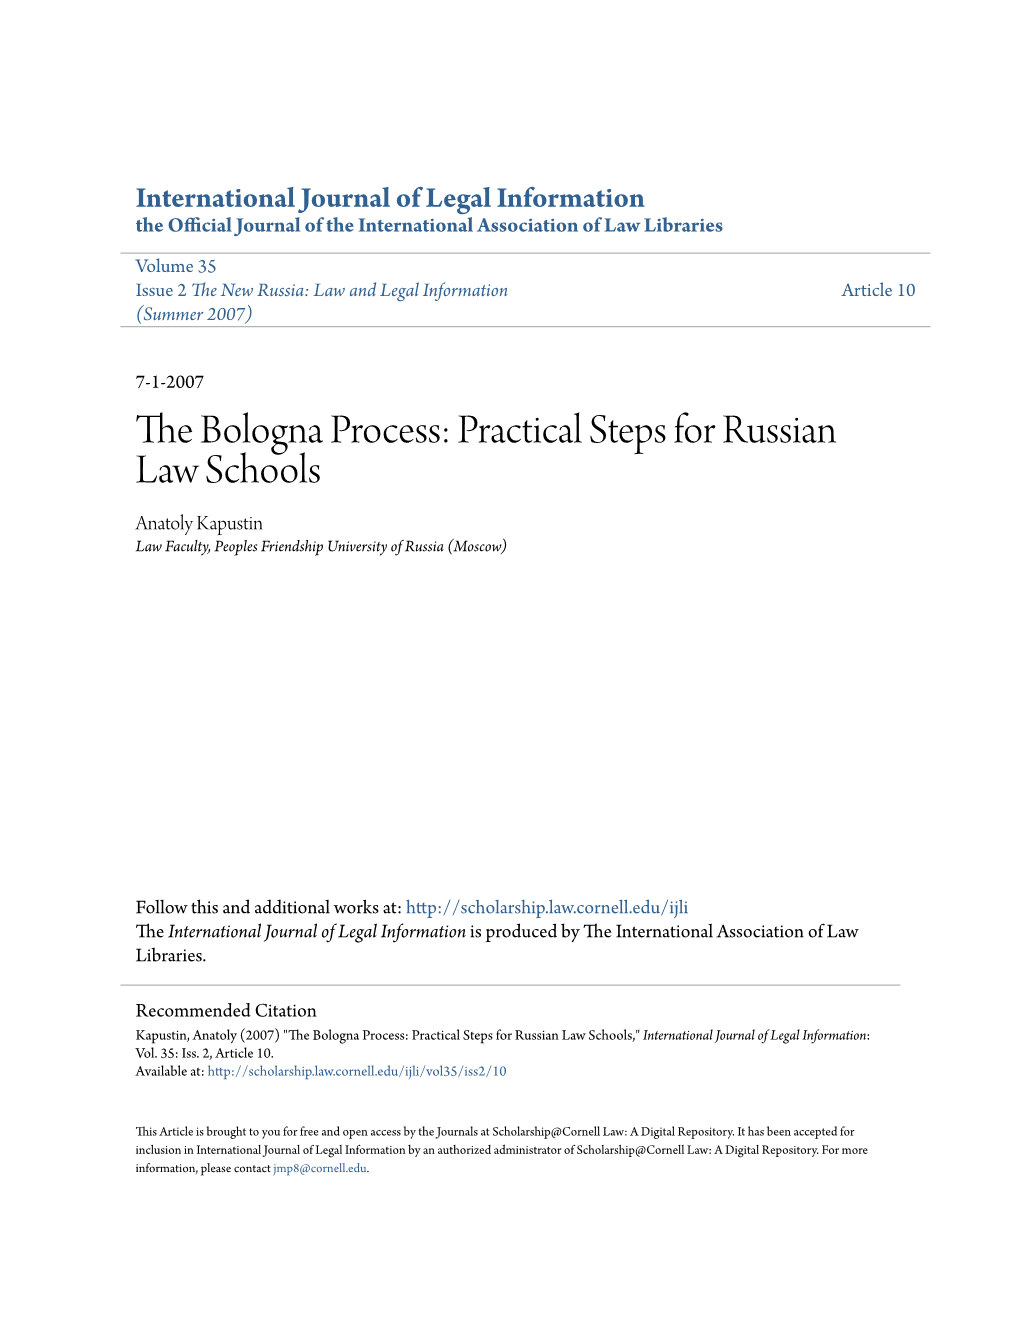 The Bologna Process: Practical Steps for Russian Law Schools Anatoly Kapustin Law Faculty, Peoples Friendship University of Russia (Moscow)